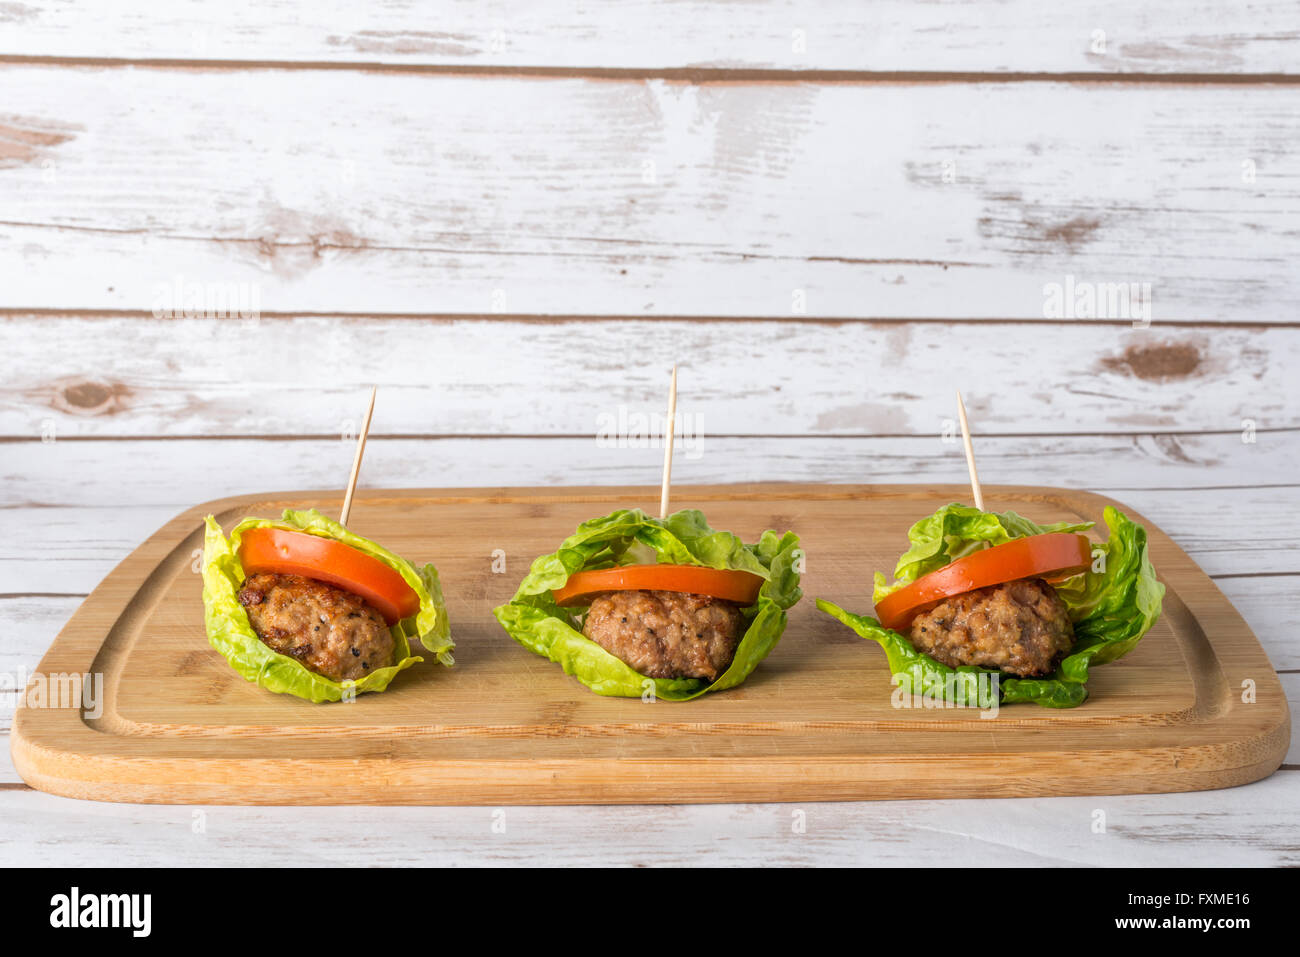 Bunless burger with bun replaced with lettuce leaves on wooden board Stock Photo